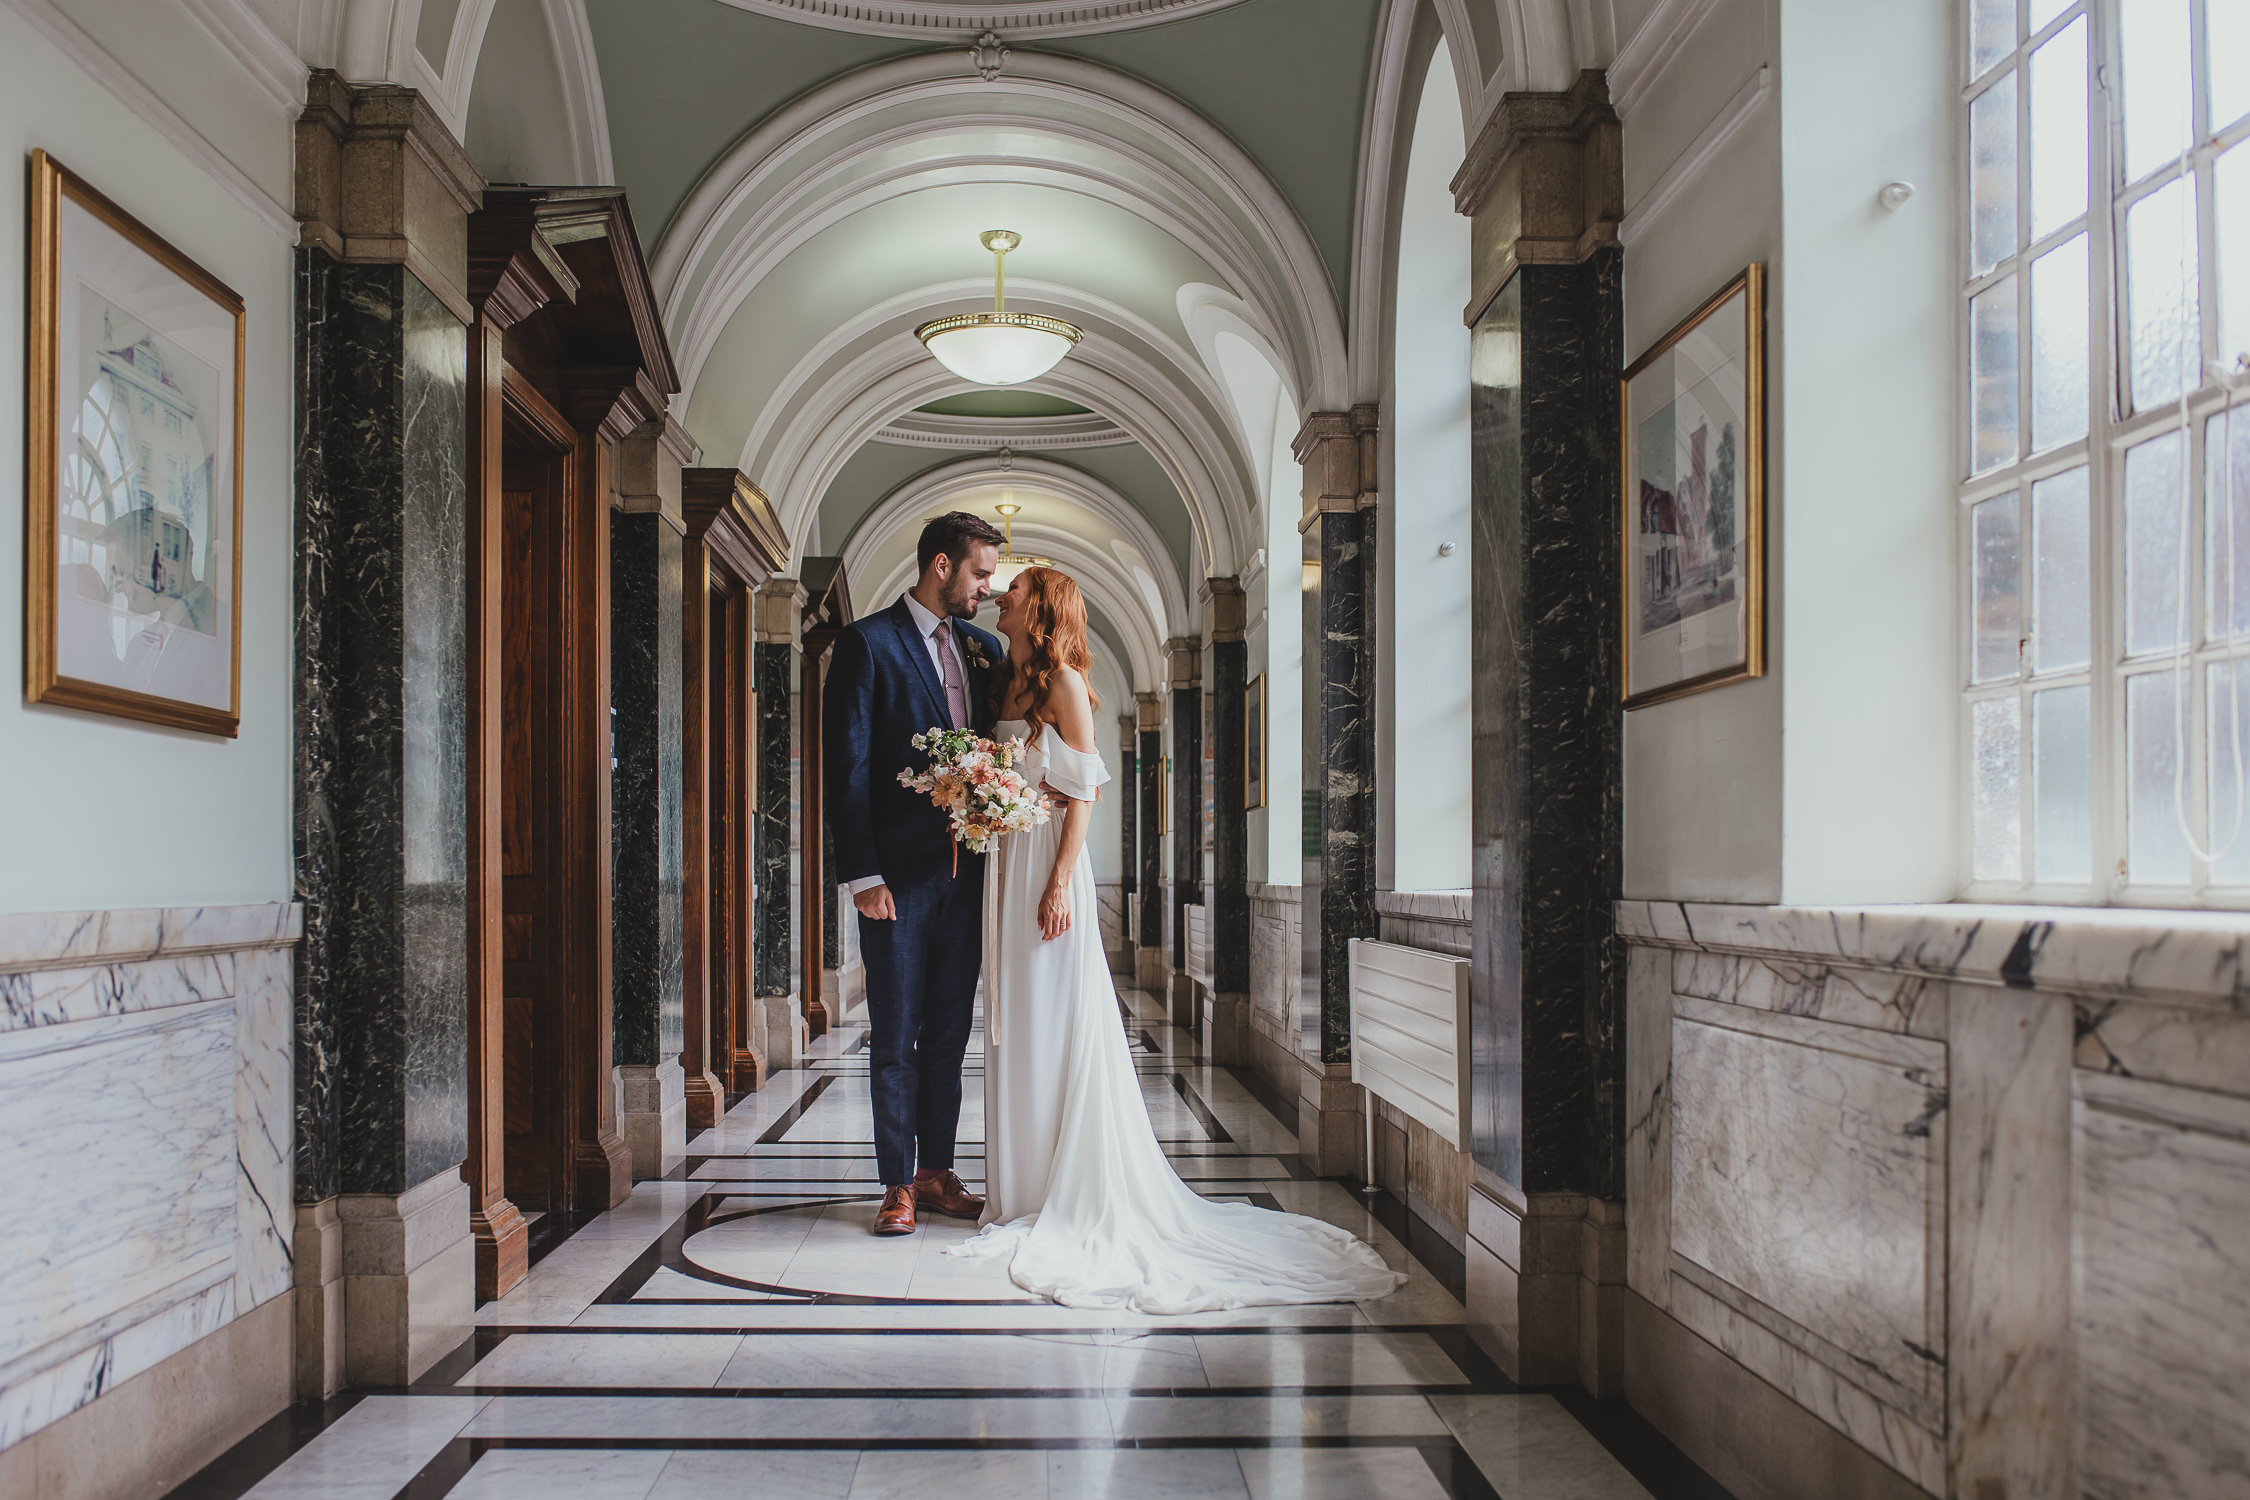 Islington Town Hall and The Depot N7 Relaxed London Wedding